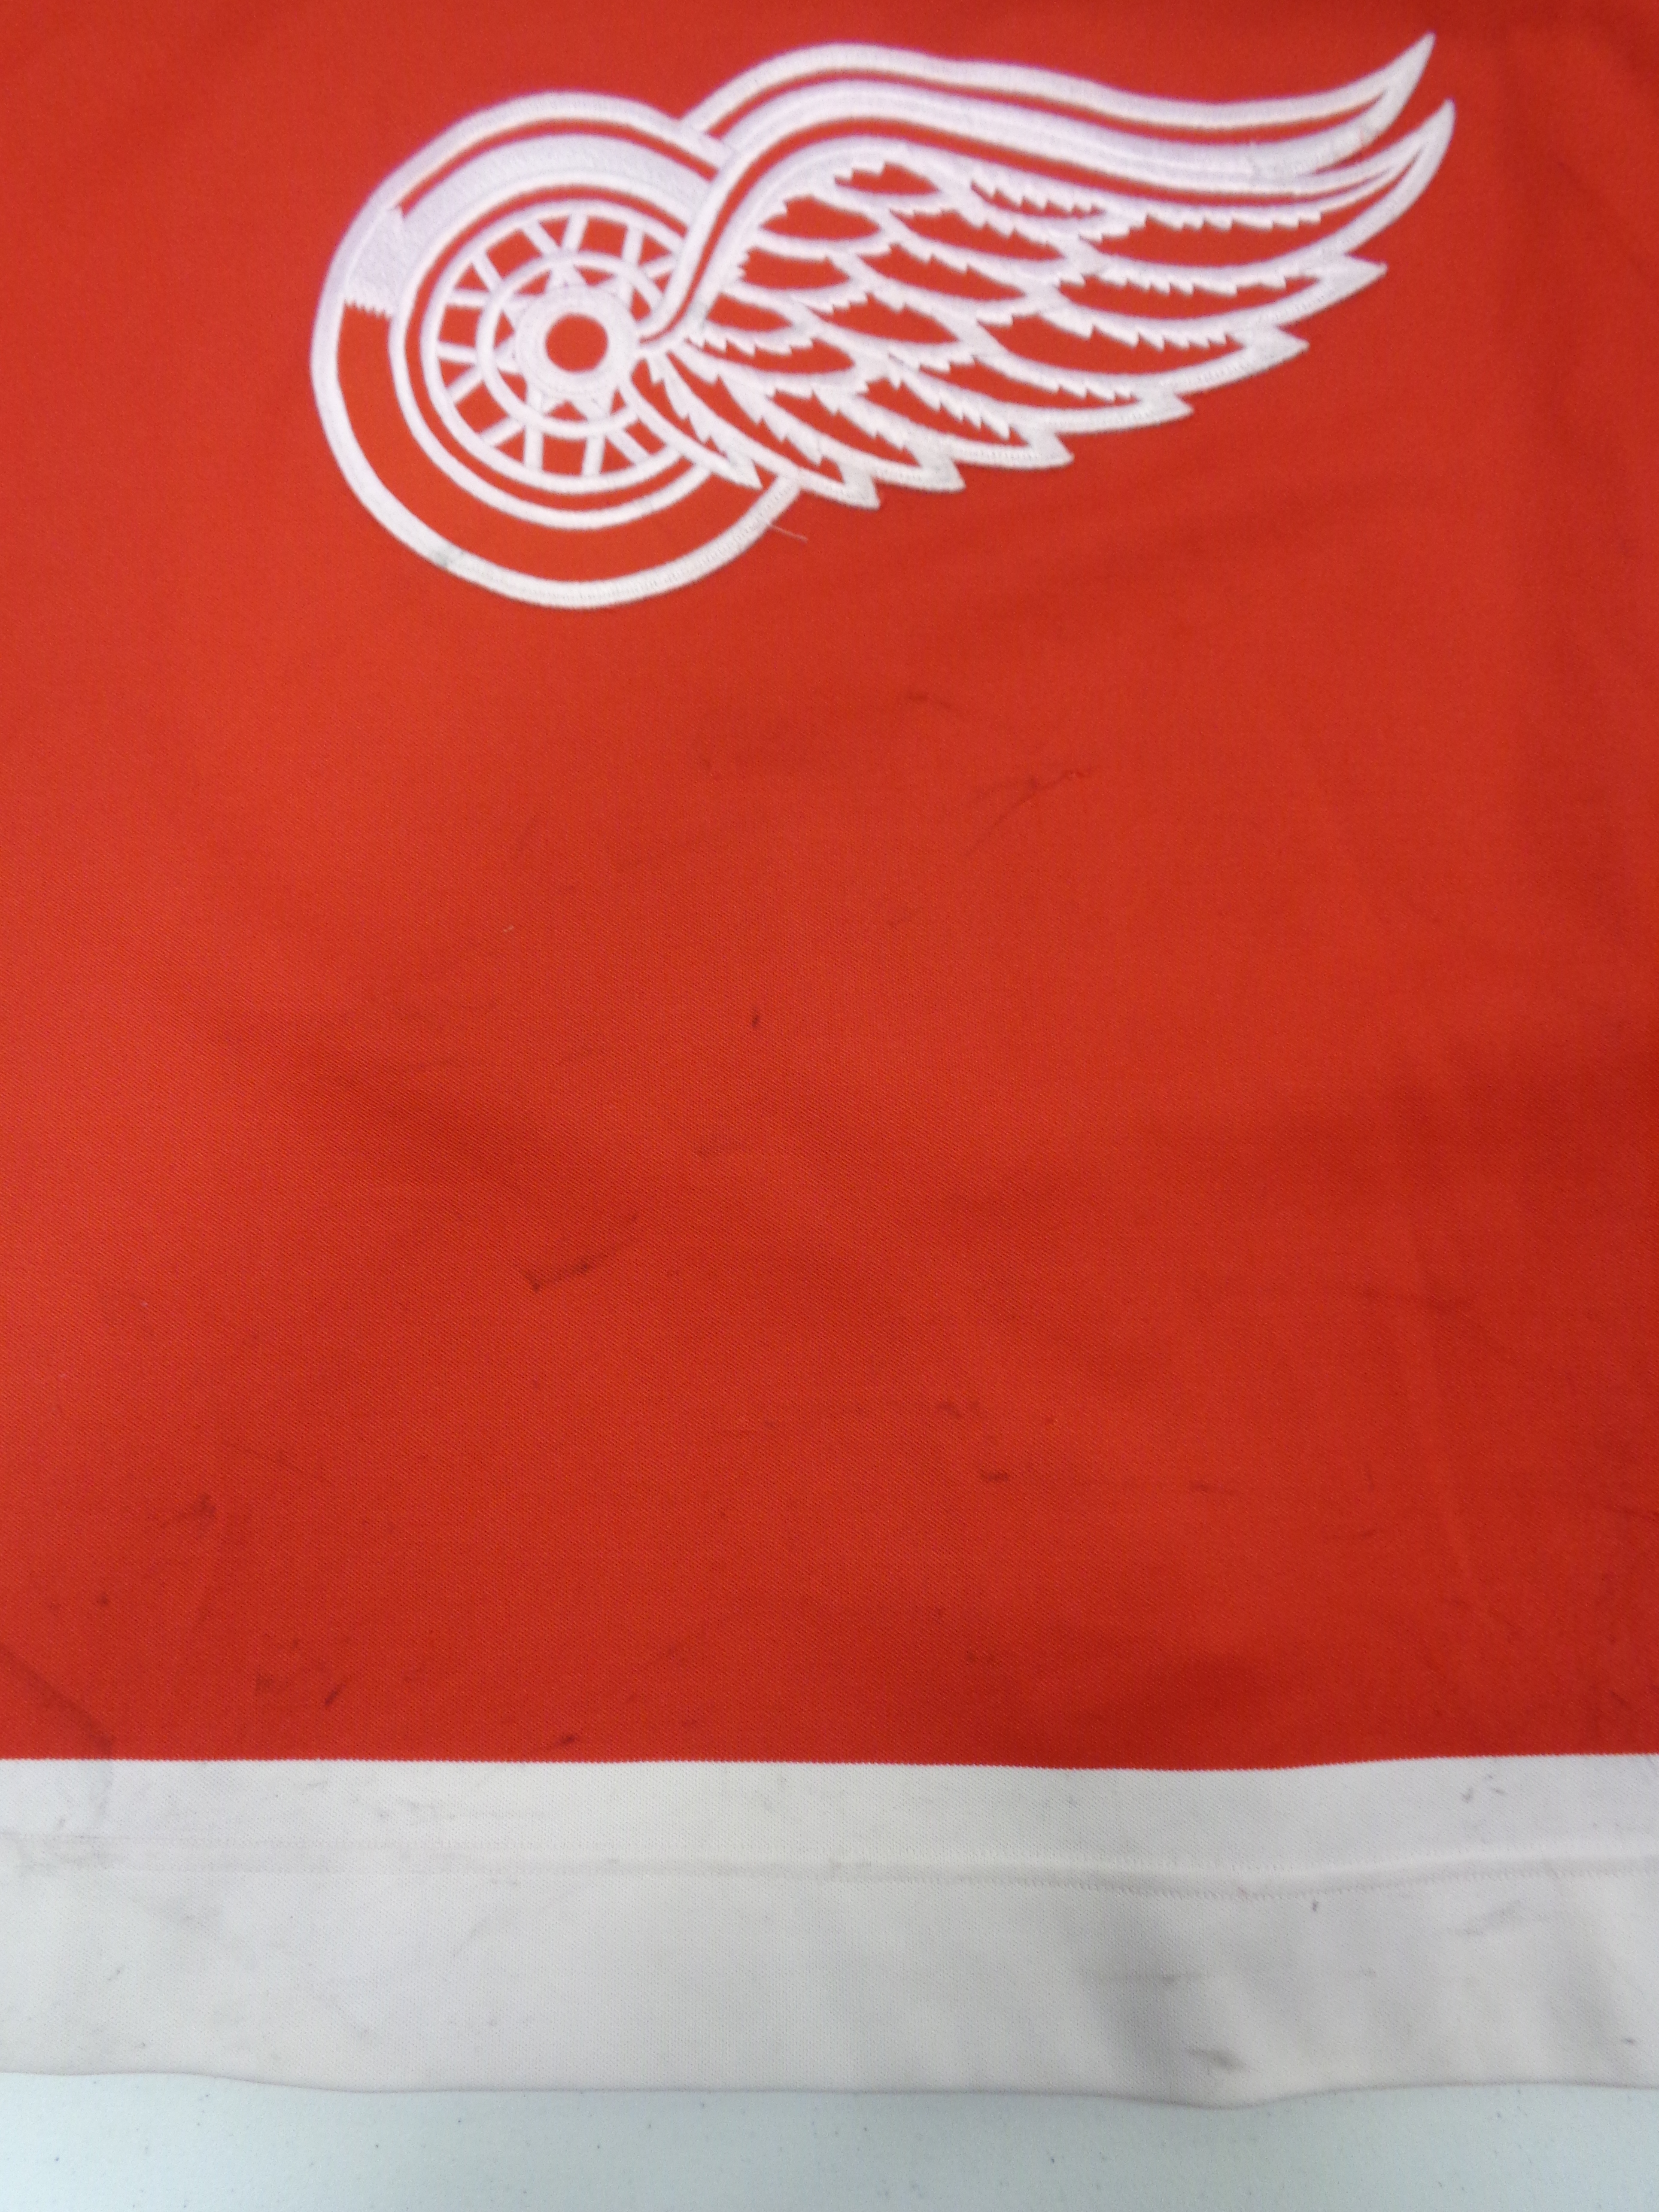 JOE KOCUR Signed Detroit Red Wings Red Adidas PRO Jersey - 3x SC Champs -  NHL Auctions